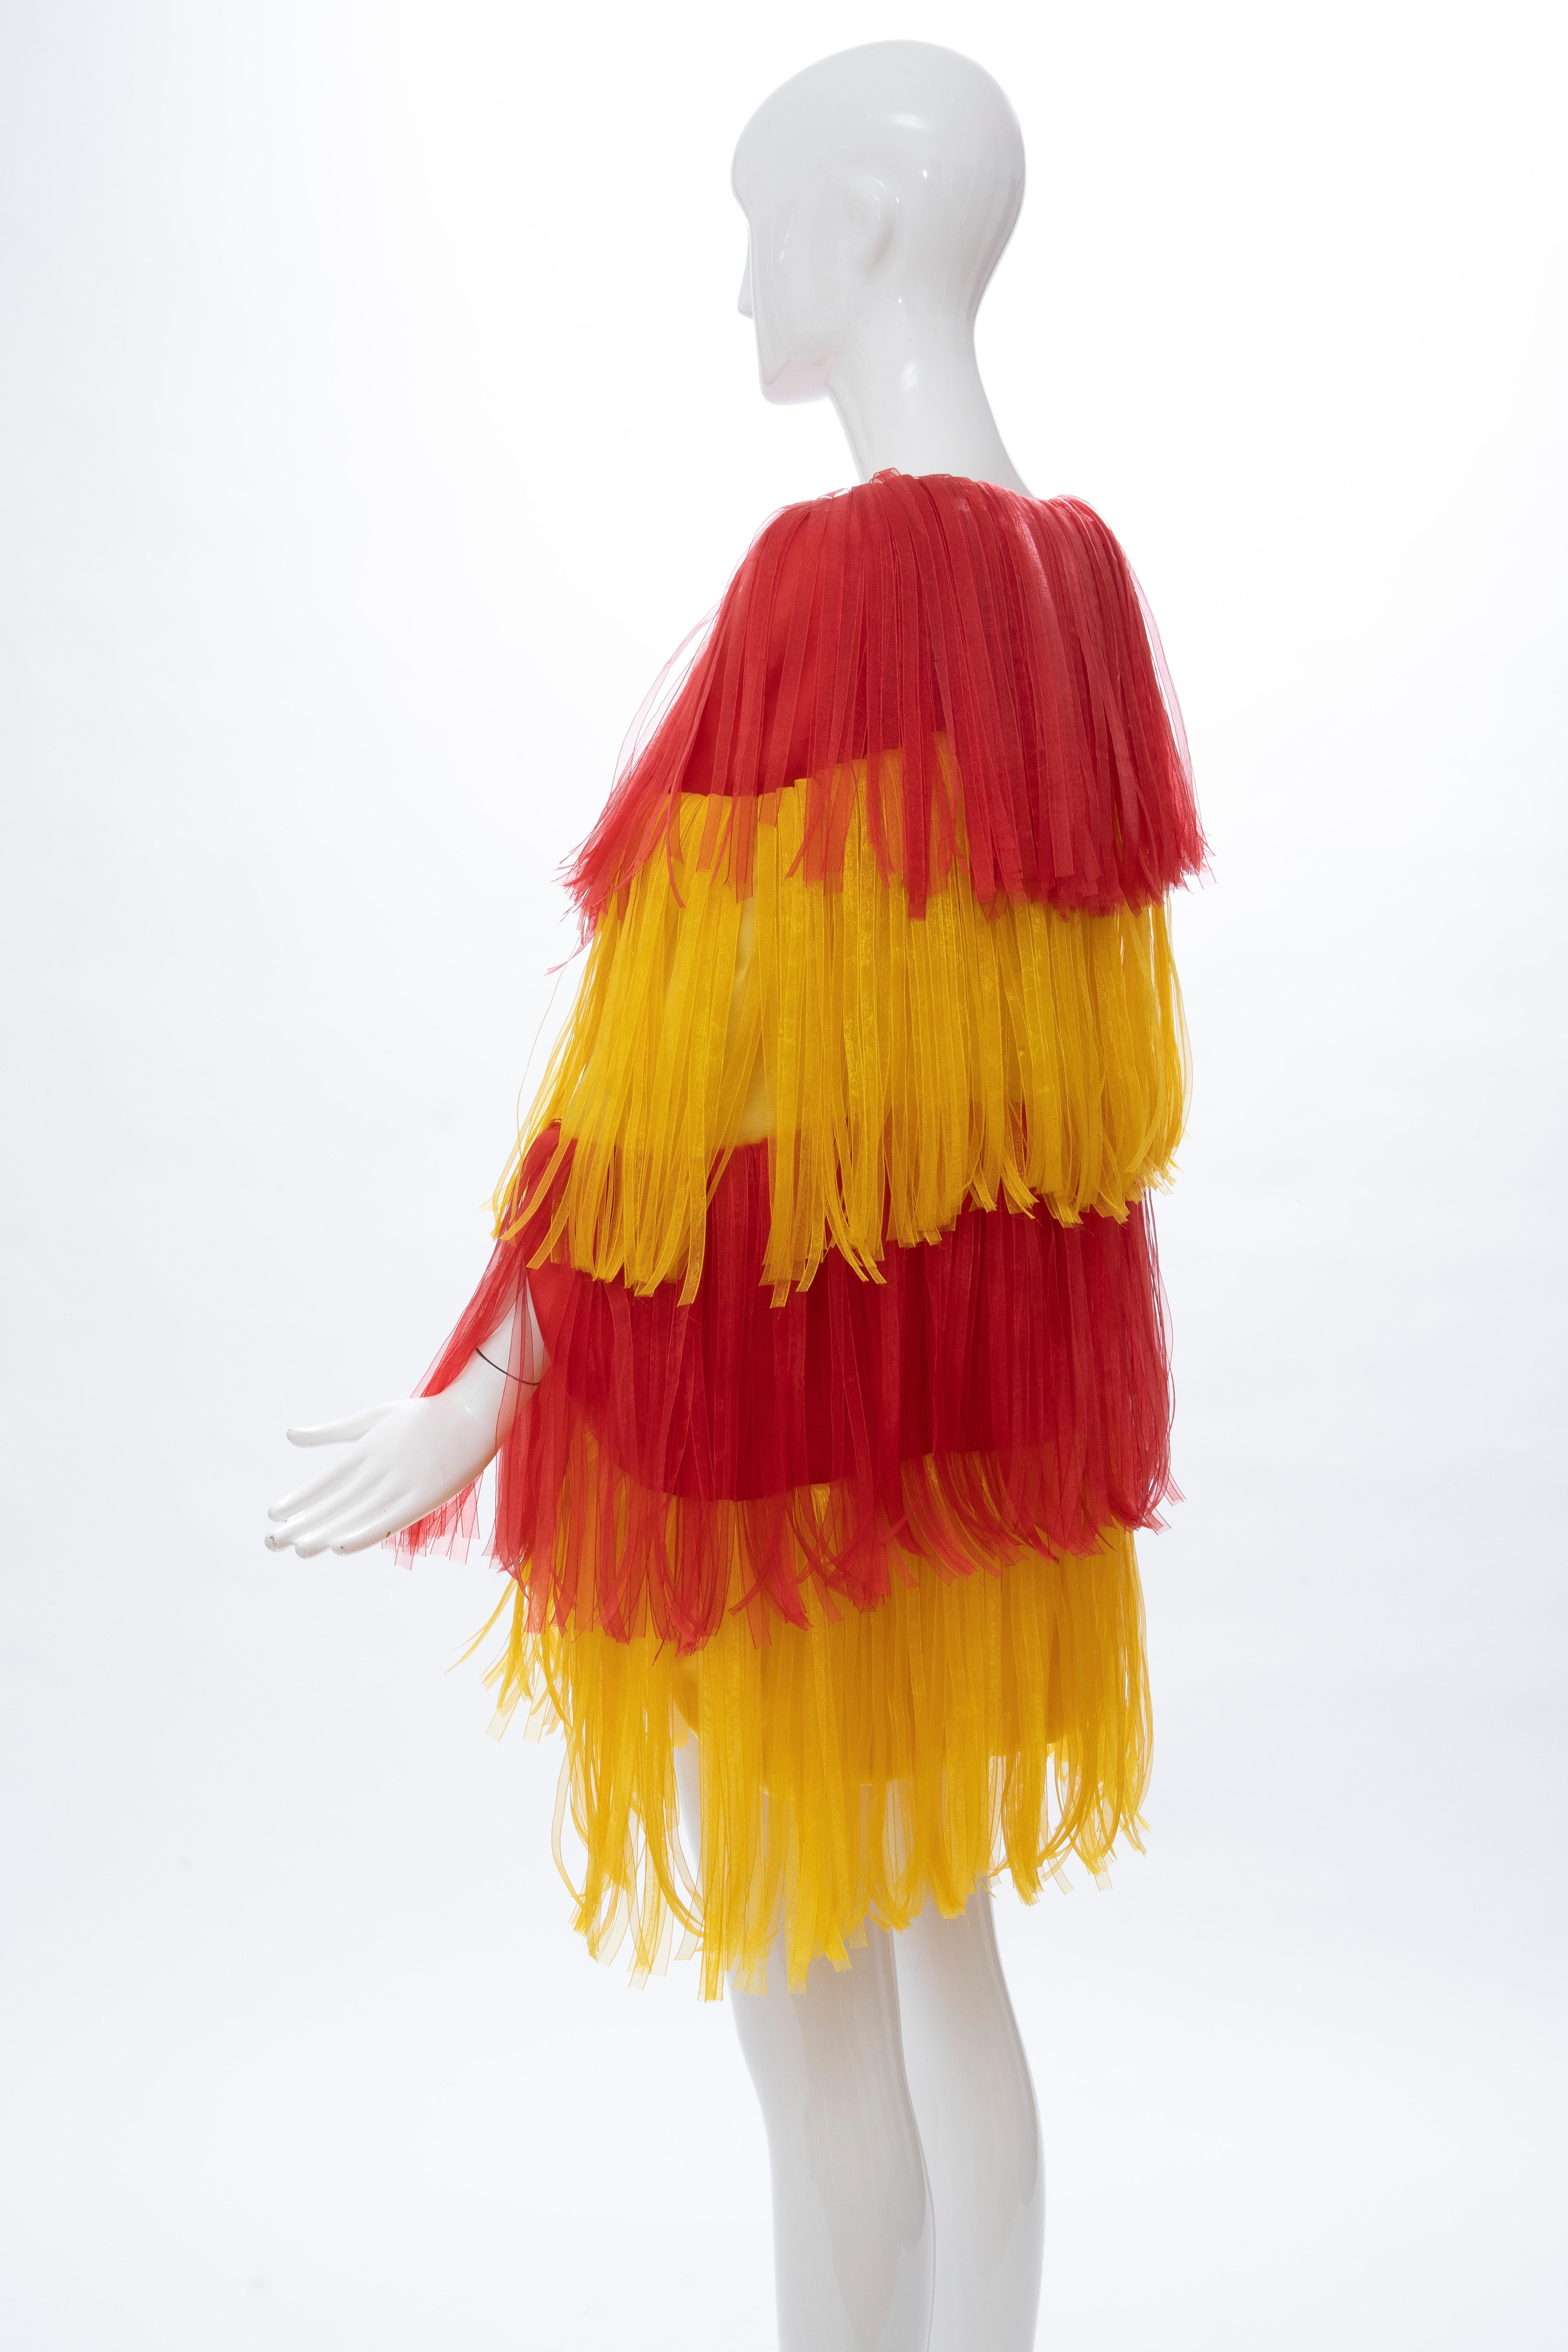 Moschino Couture Runway Silk Fringe Car Wash Evening Dress, Spring 2016 In Excellent Condition For Sale In Cincinnati, OH